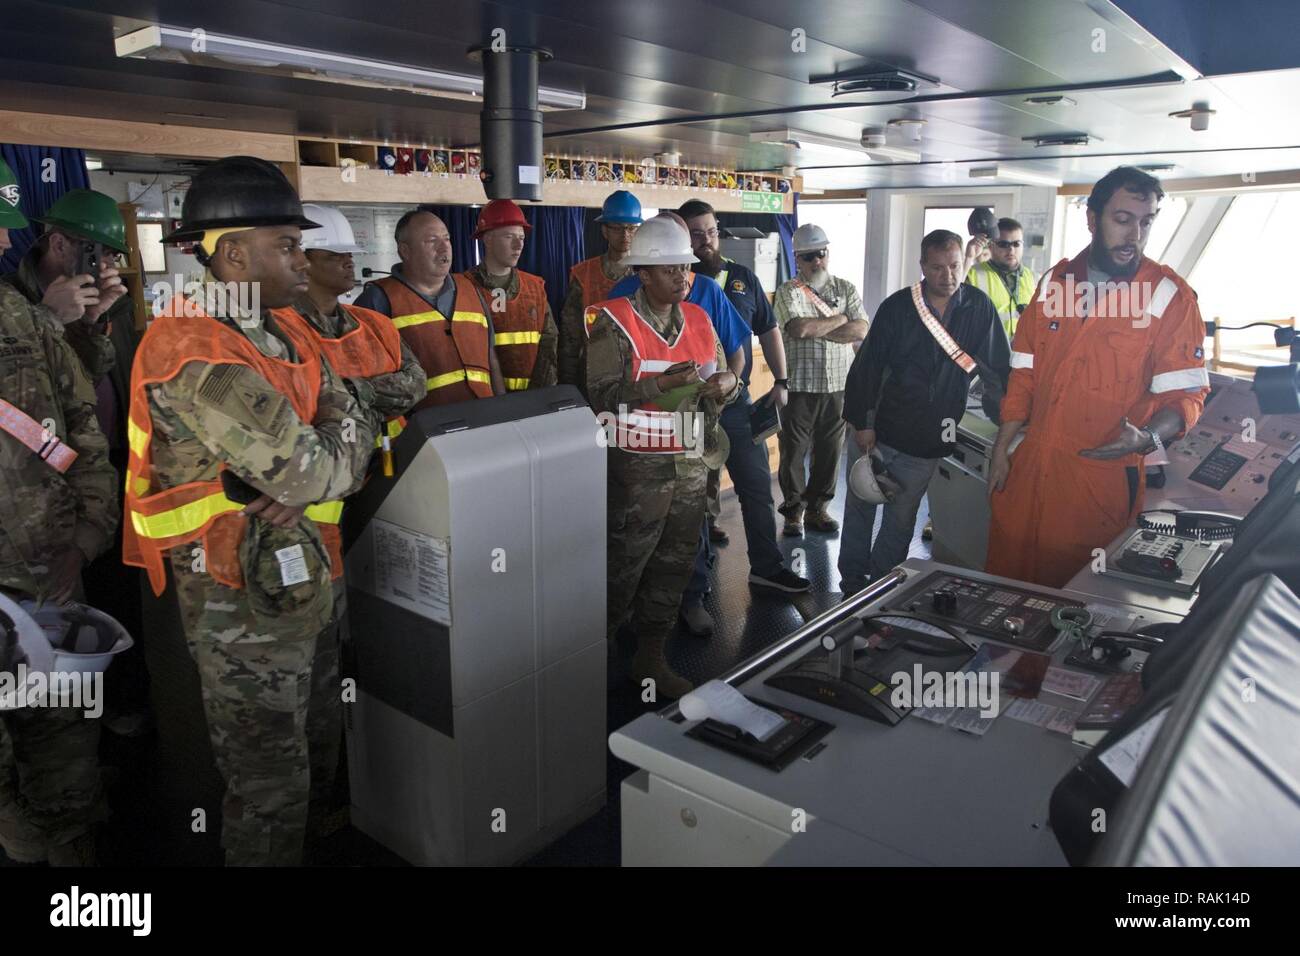 Adler Scott, 3rd Mate of the “Alliance Norfolk” vessel, (right), talks about safety procedures and vessel capabilities during the 2017 Worldwide Ammunition Logistics and Explosives Safety Review in Shuaiba Port, Kuwait, on Feb. 10, 2017. Stock Photo